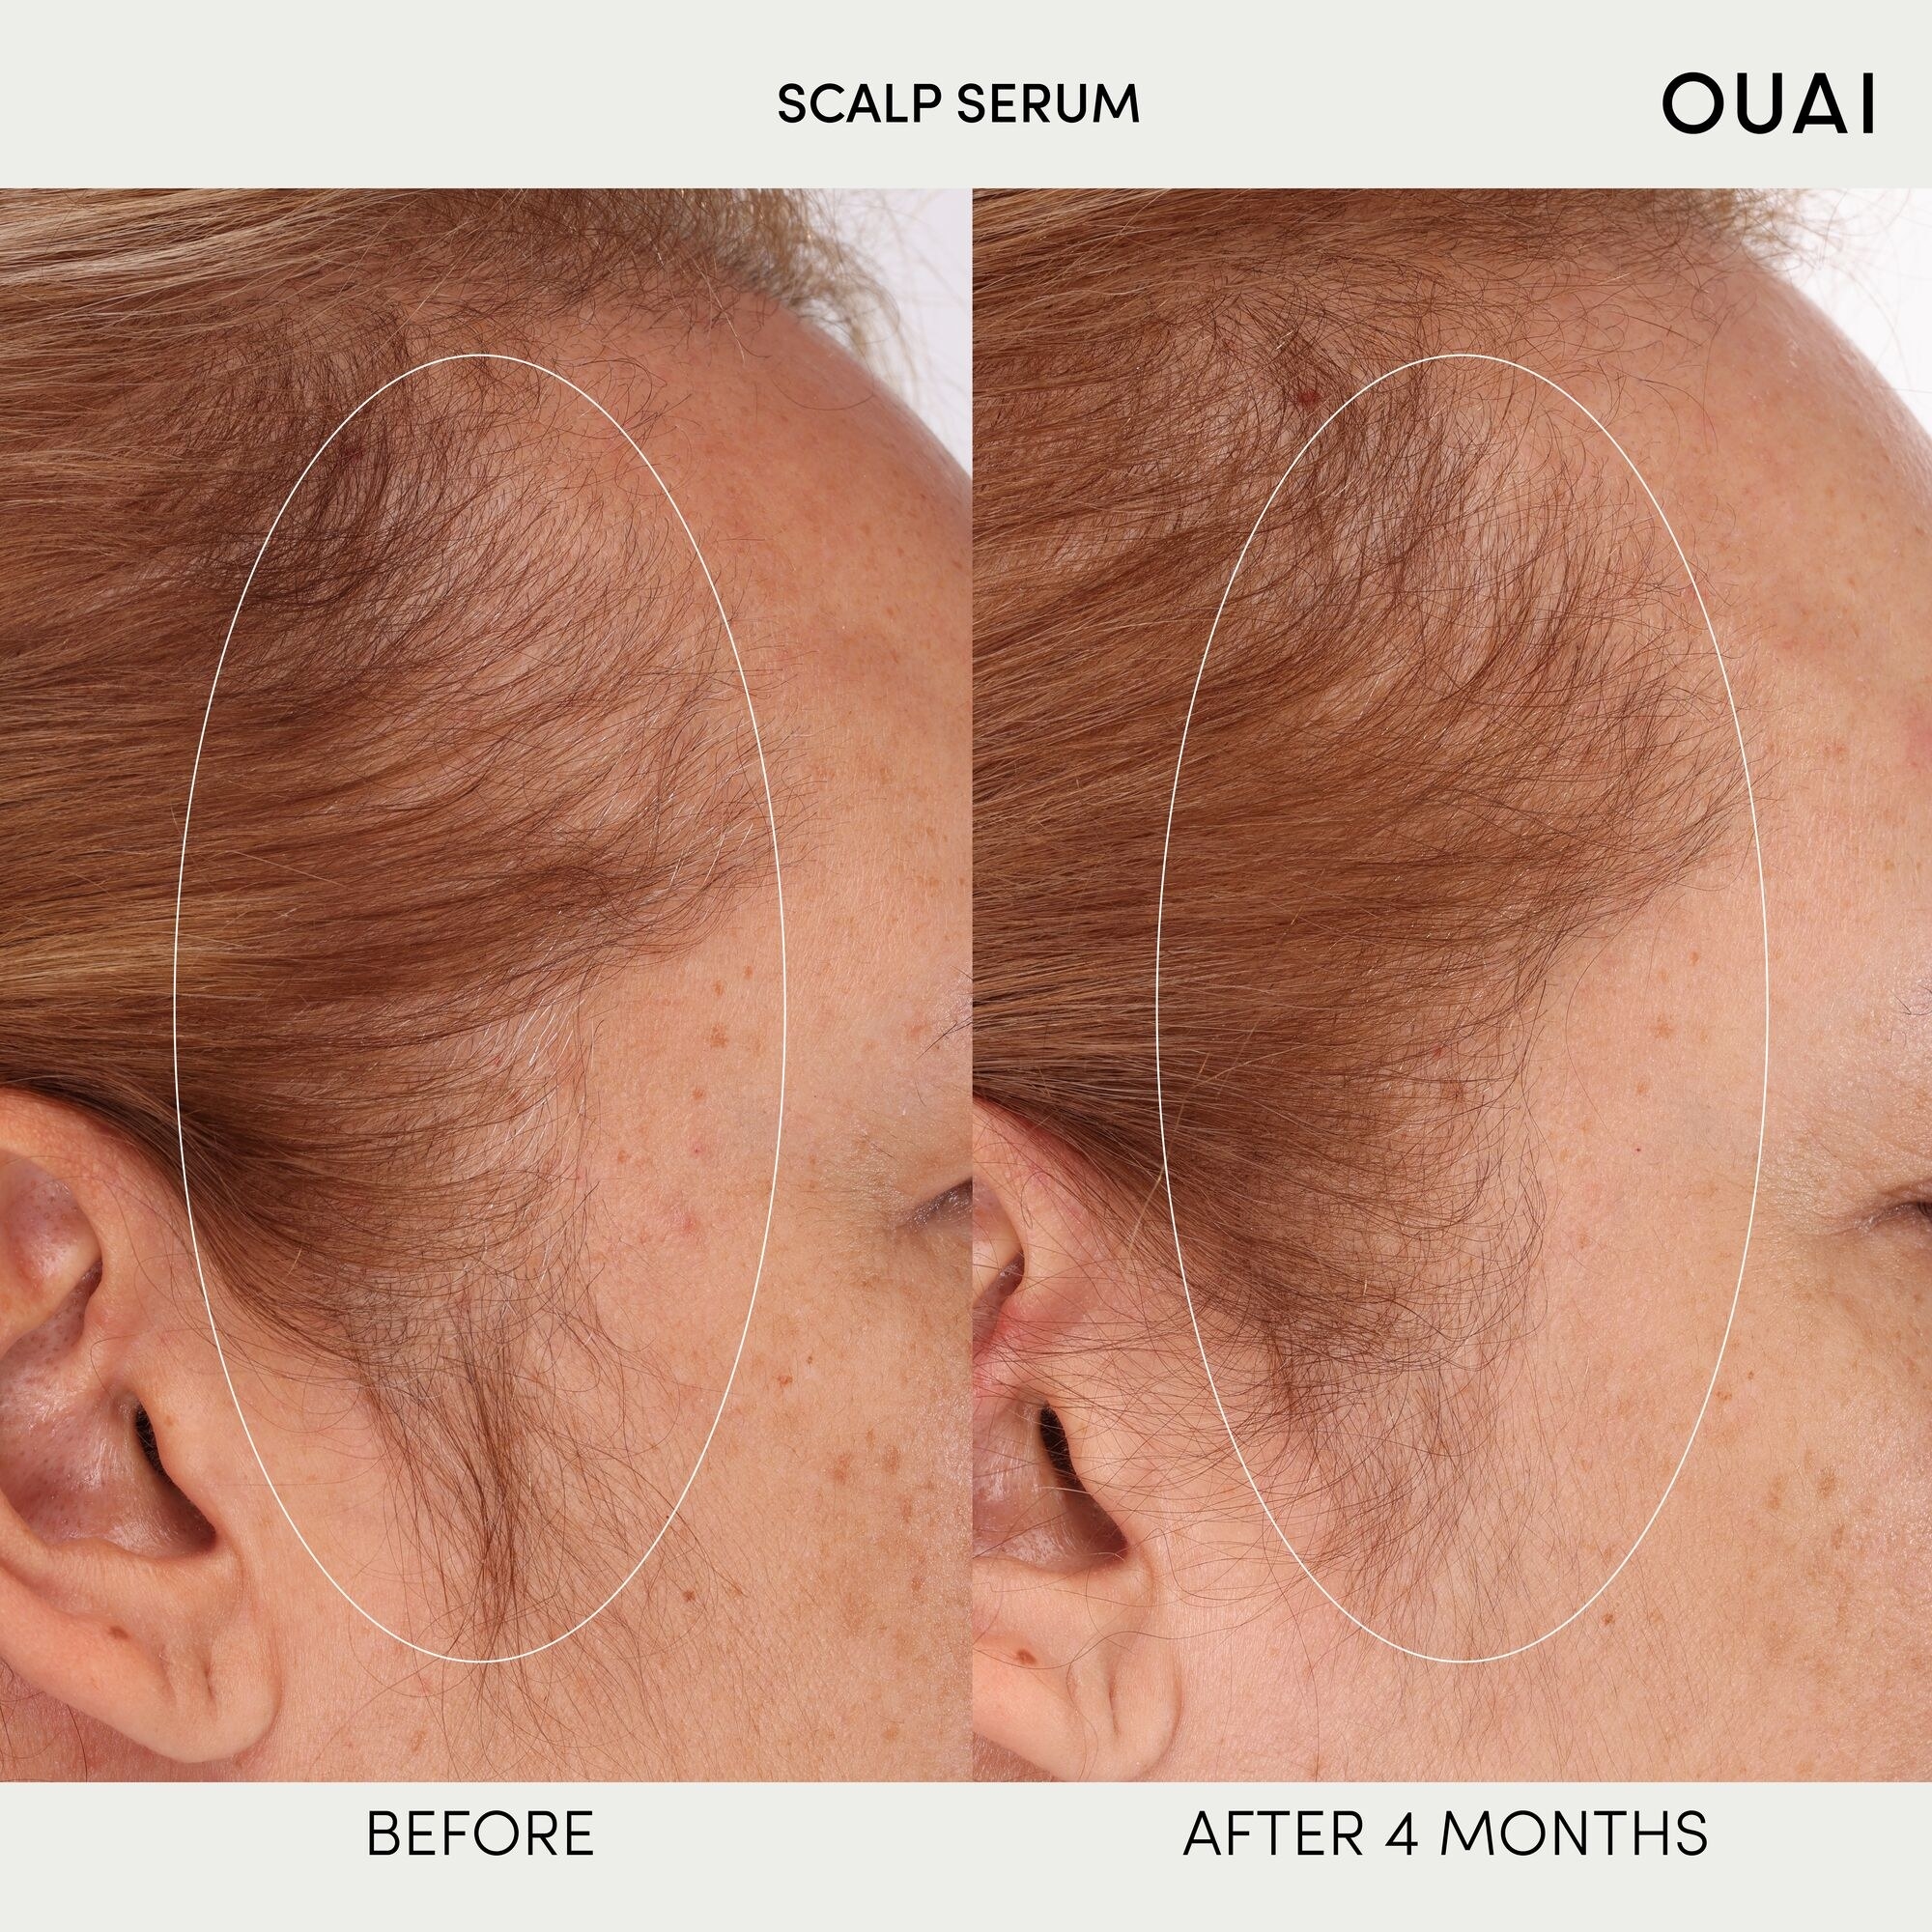 a before and after photo using the Ouai Hydrating Scalp Serum